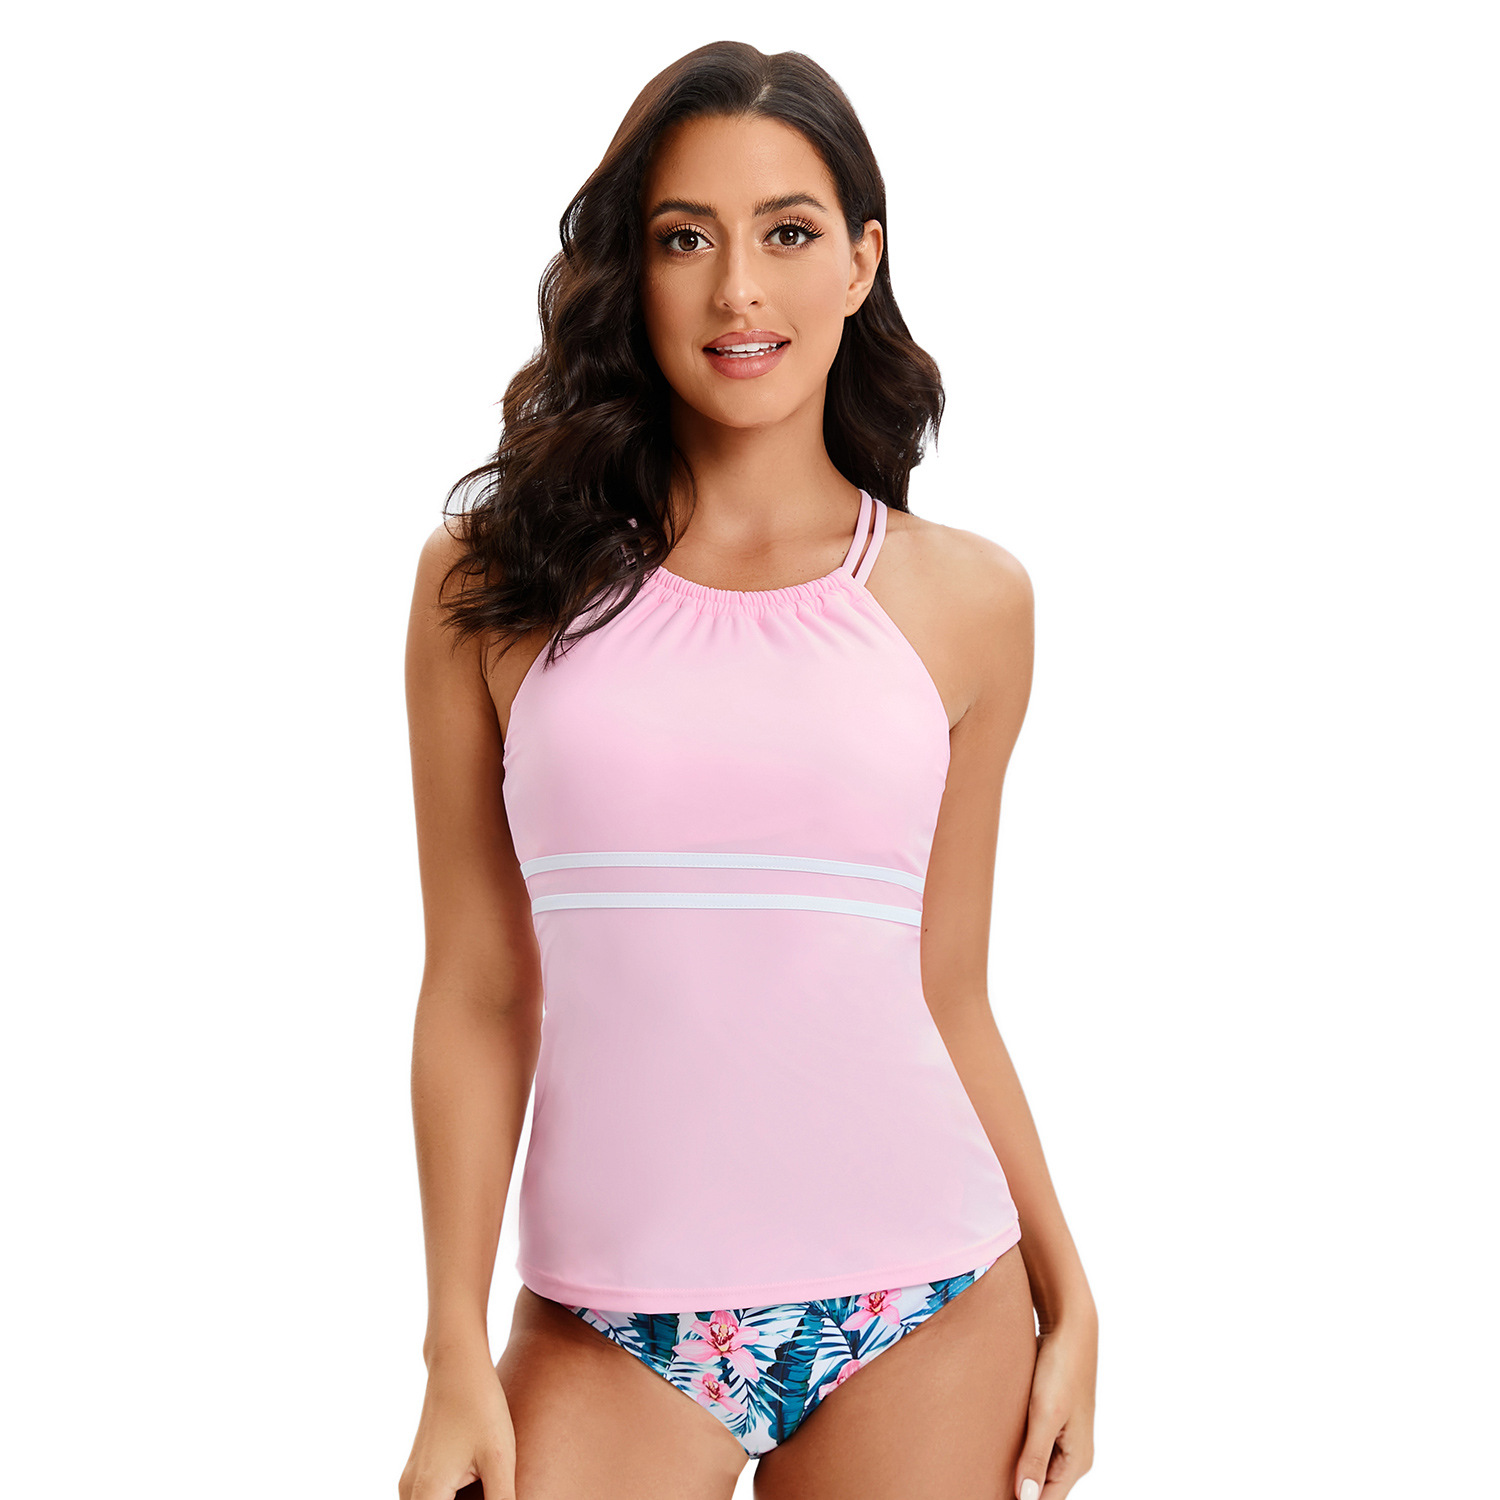 Printed Cross Conservative Two-Piece Swimsuit B101